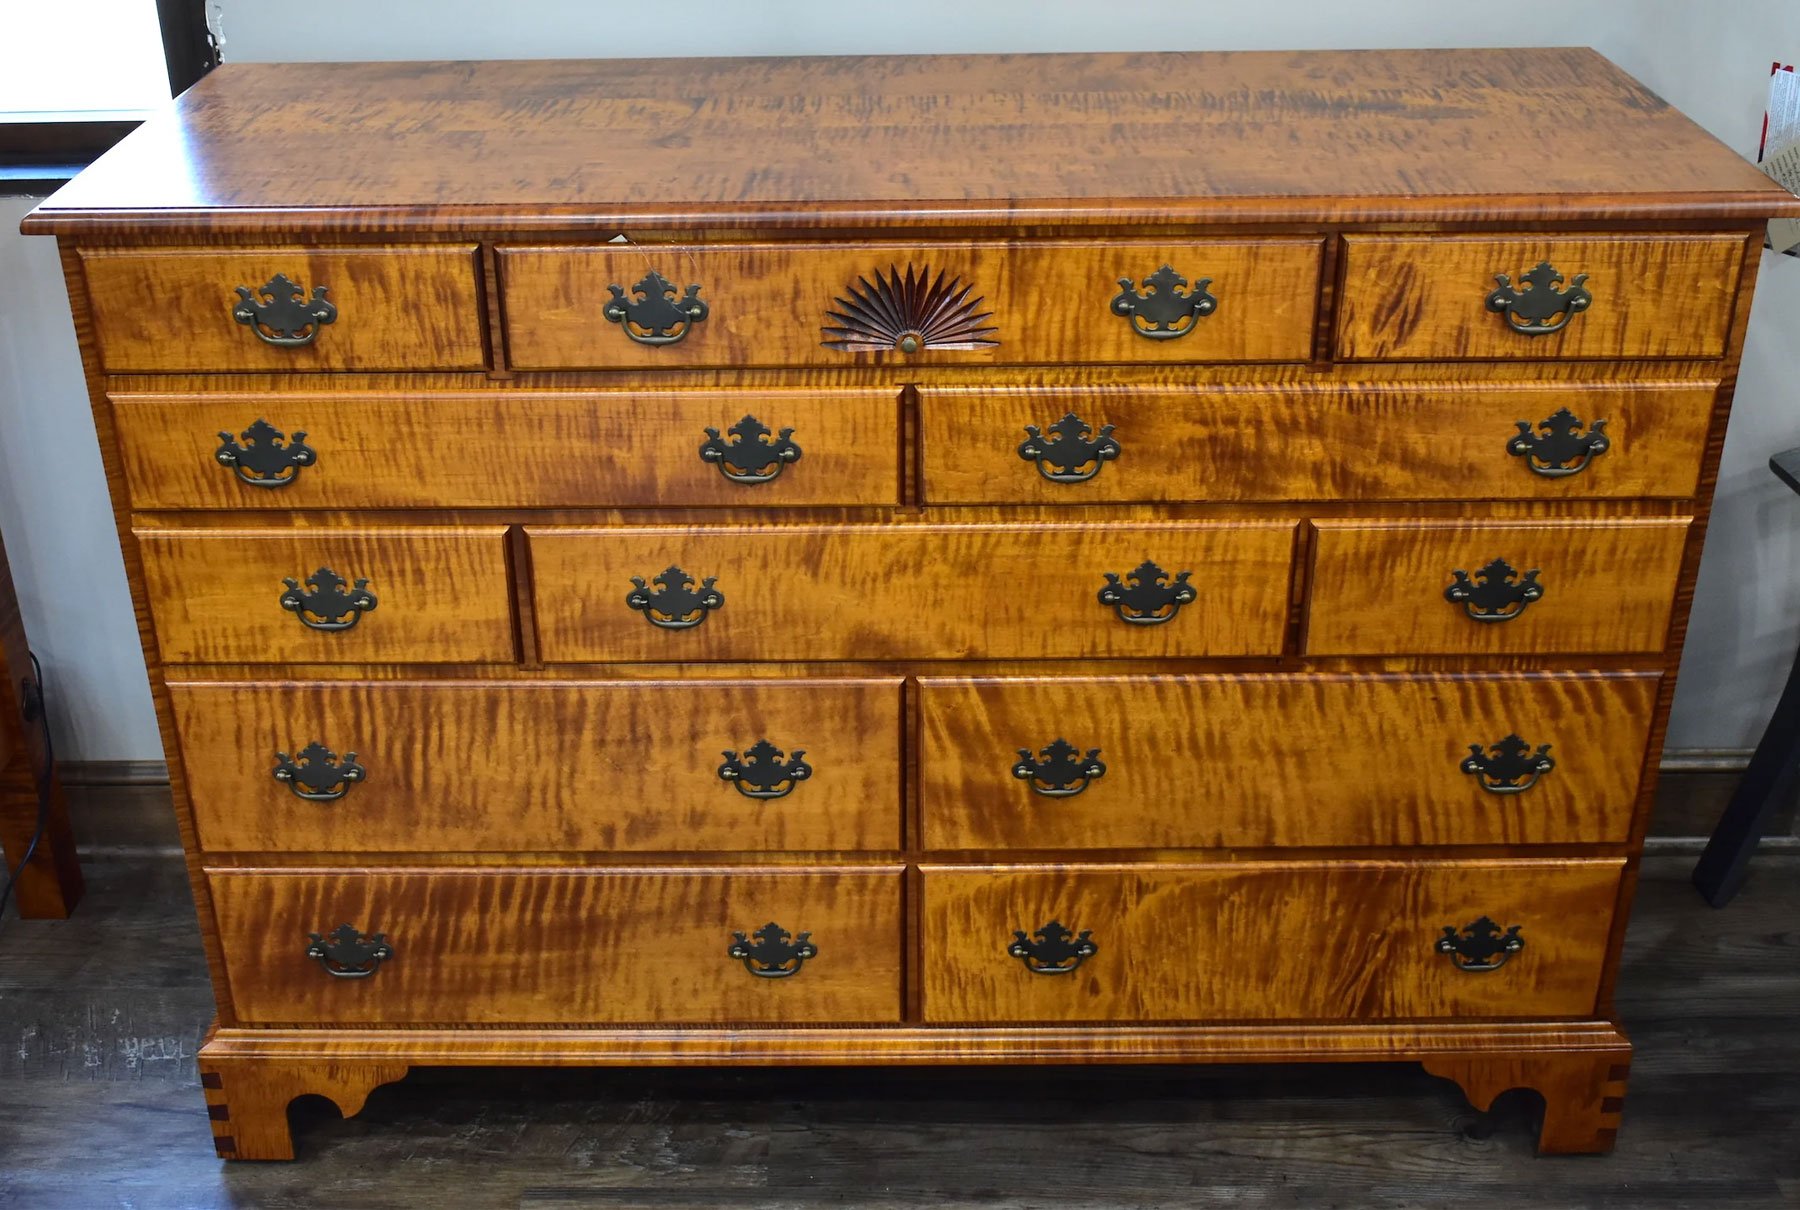 Treharn Mule Chest with Dovetail Bracket Feet in Tiger Maple